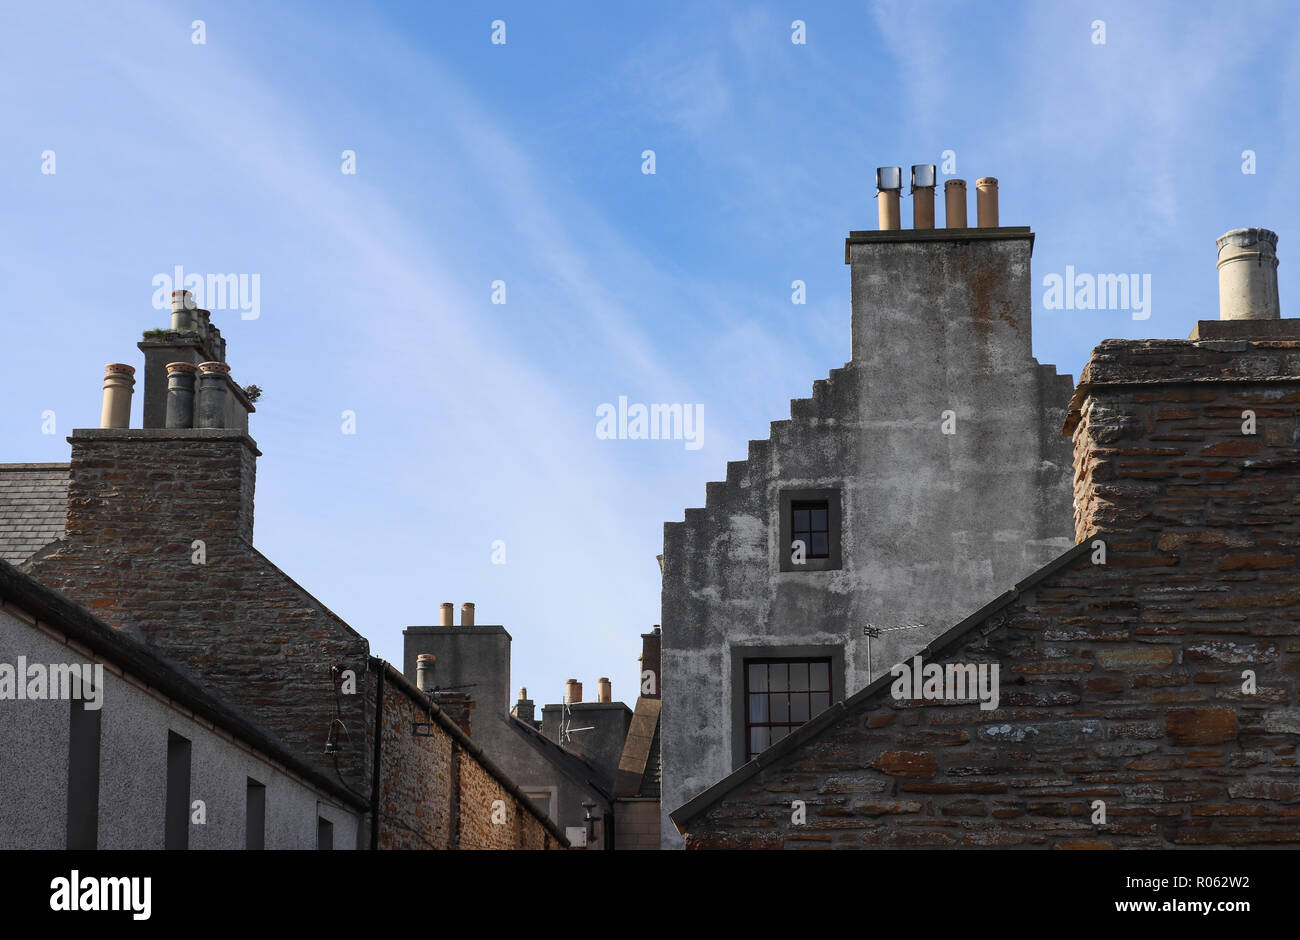 Several 18-19th Century buildings with stepped gable ends and many chimneys in Stromness, Scotland, seen against a blue sky with lots of copy space. Stock Photo